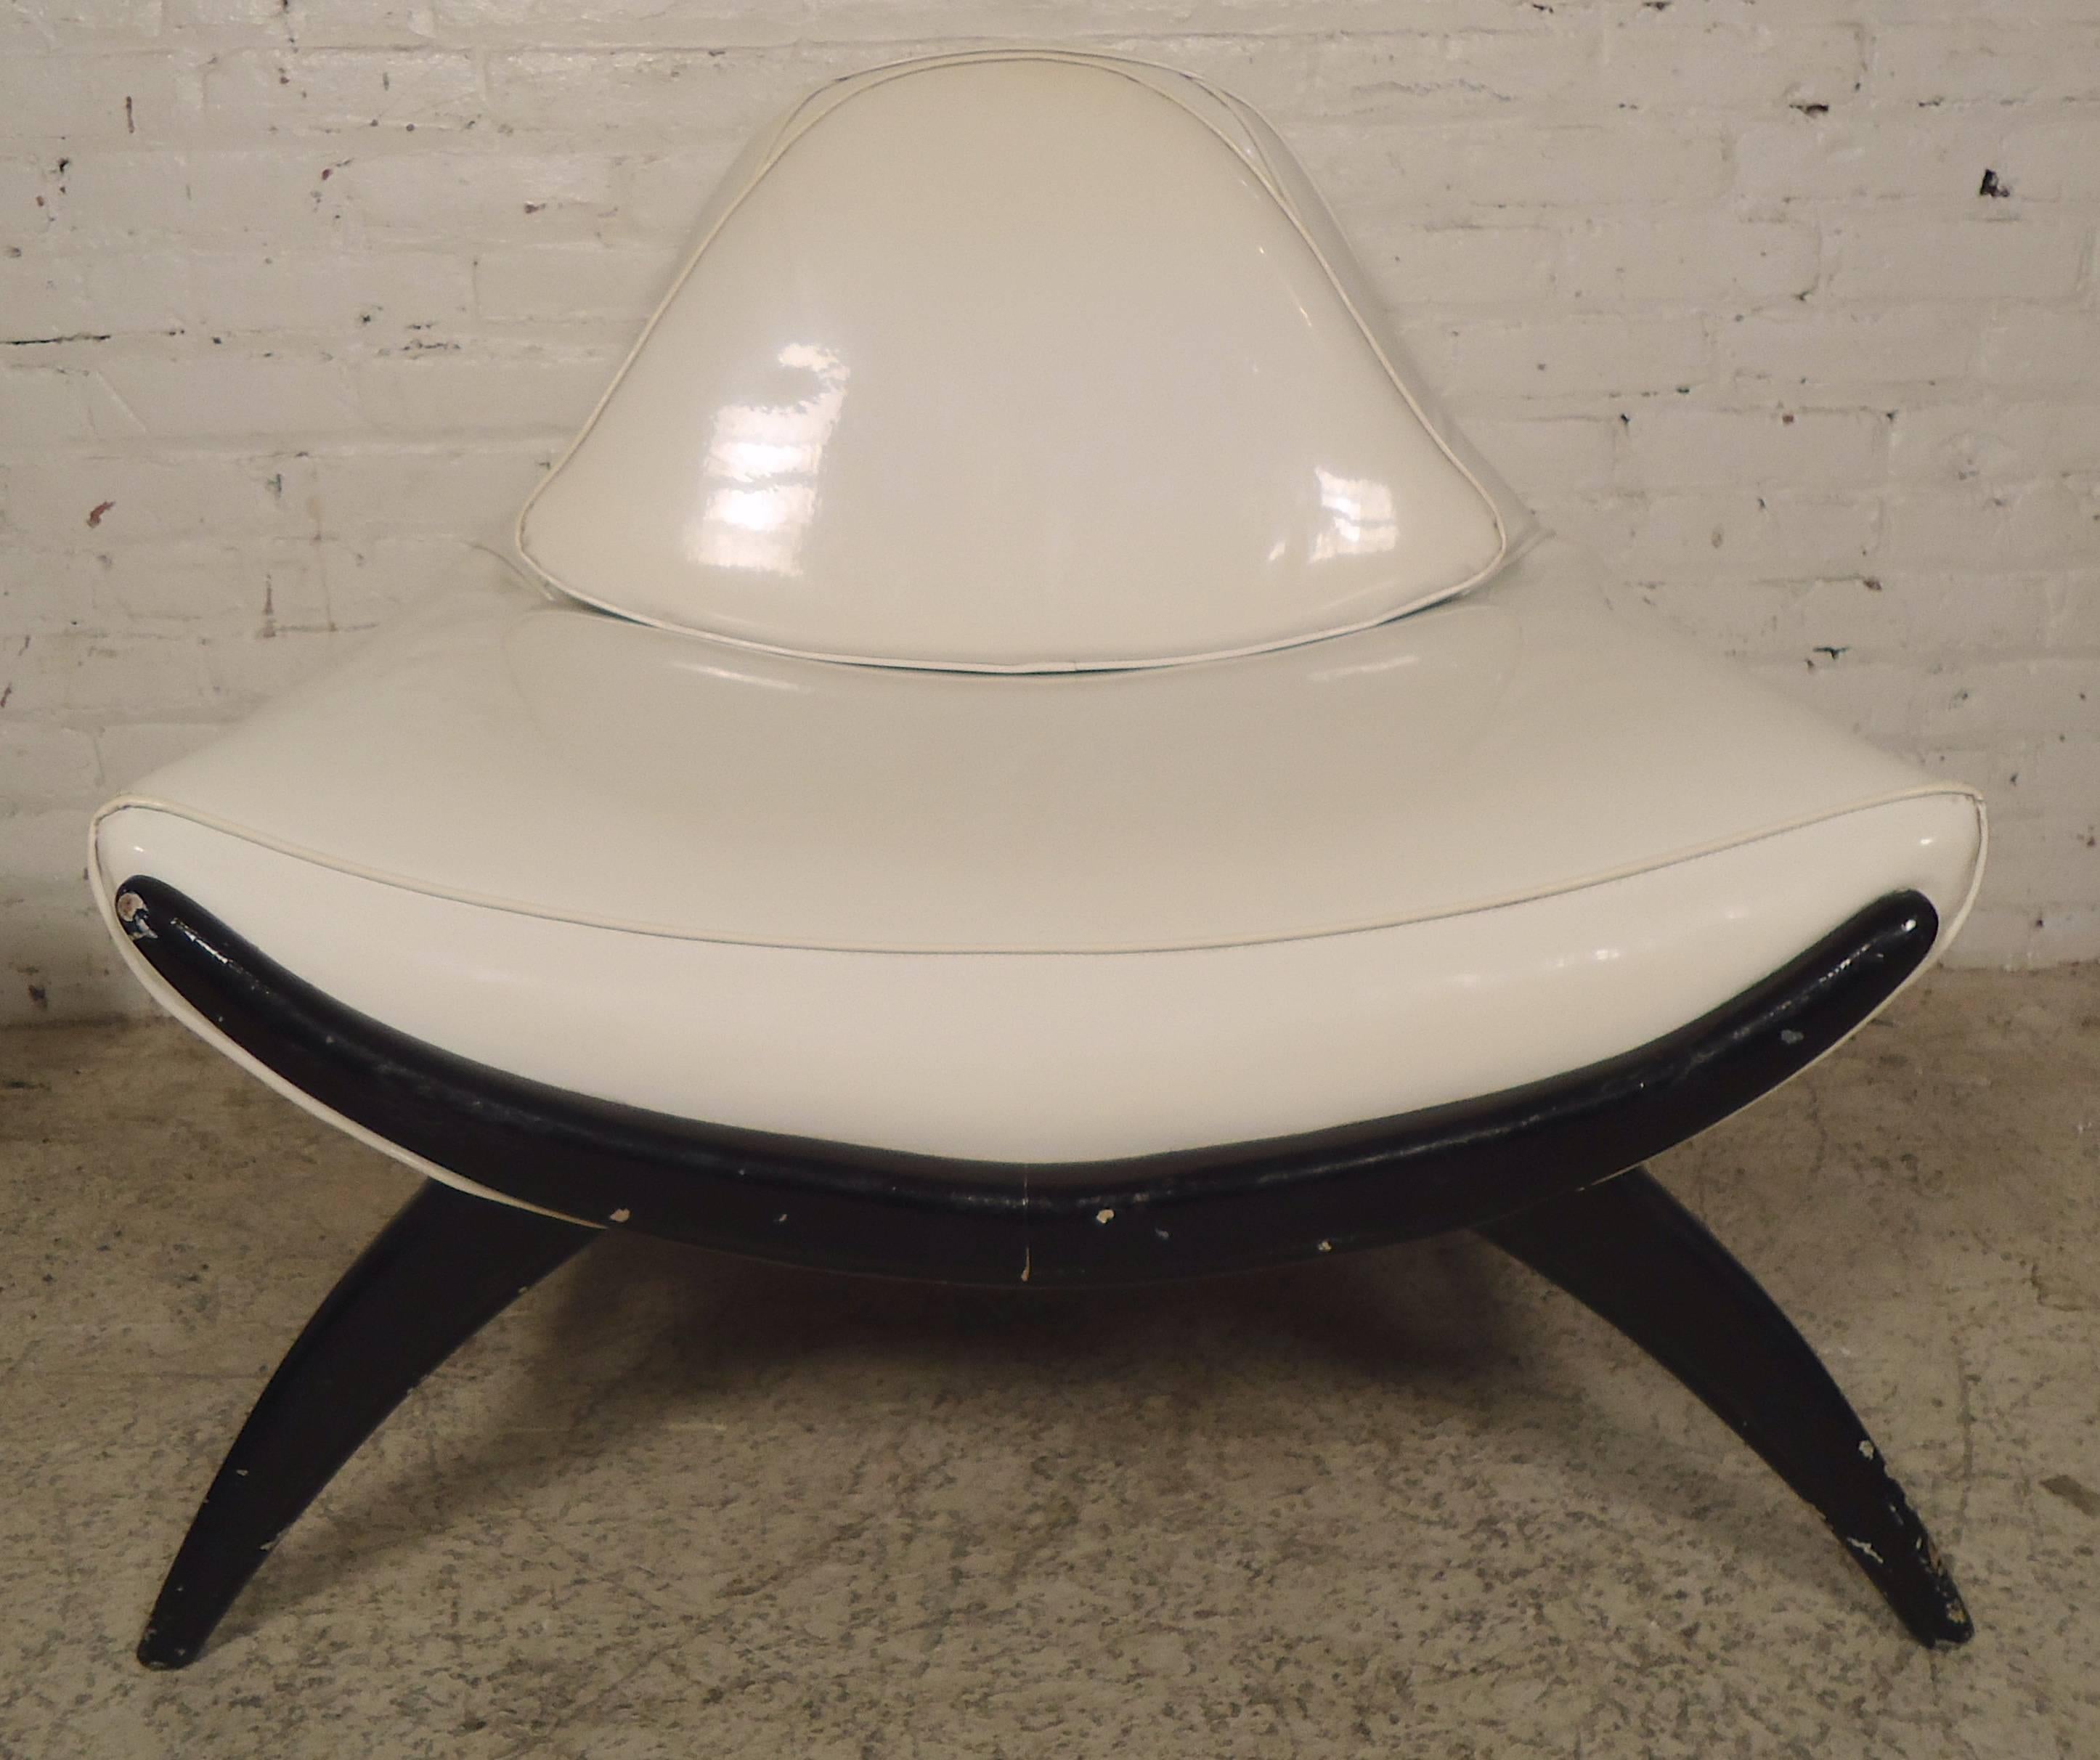 Super 1960s style designed by Adrian Pearsall with wide seating and large ottoman. Black sculpted frames and white vinyl upholstery.

(Please confirm item location NY or NJ with dealer).
                       